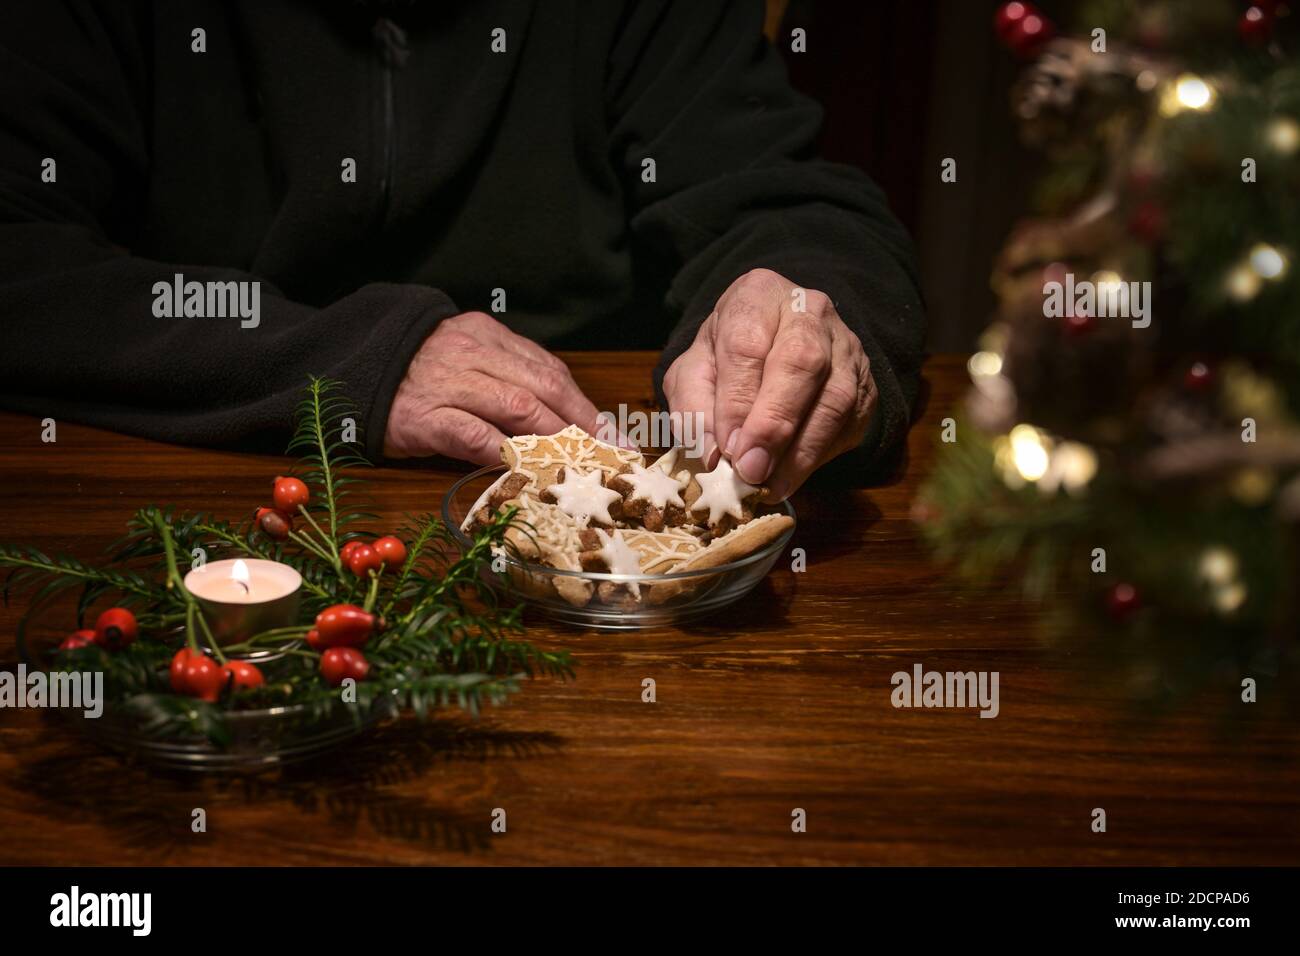 Hands of a lonely old man taking Christmas cookies on a table with burning candle and festive decoration, sad holidays during the coronavirus pandemic Stock Photo